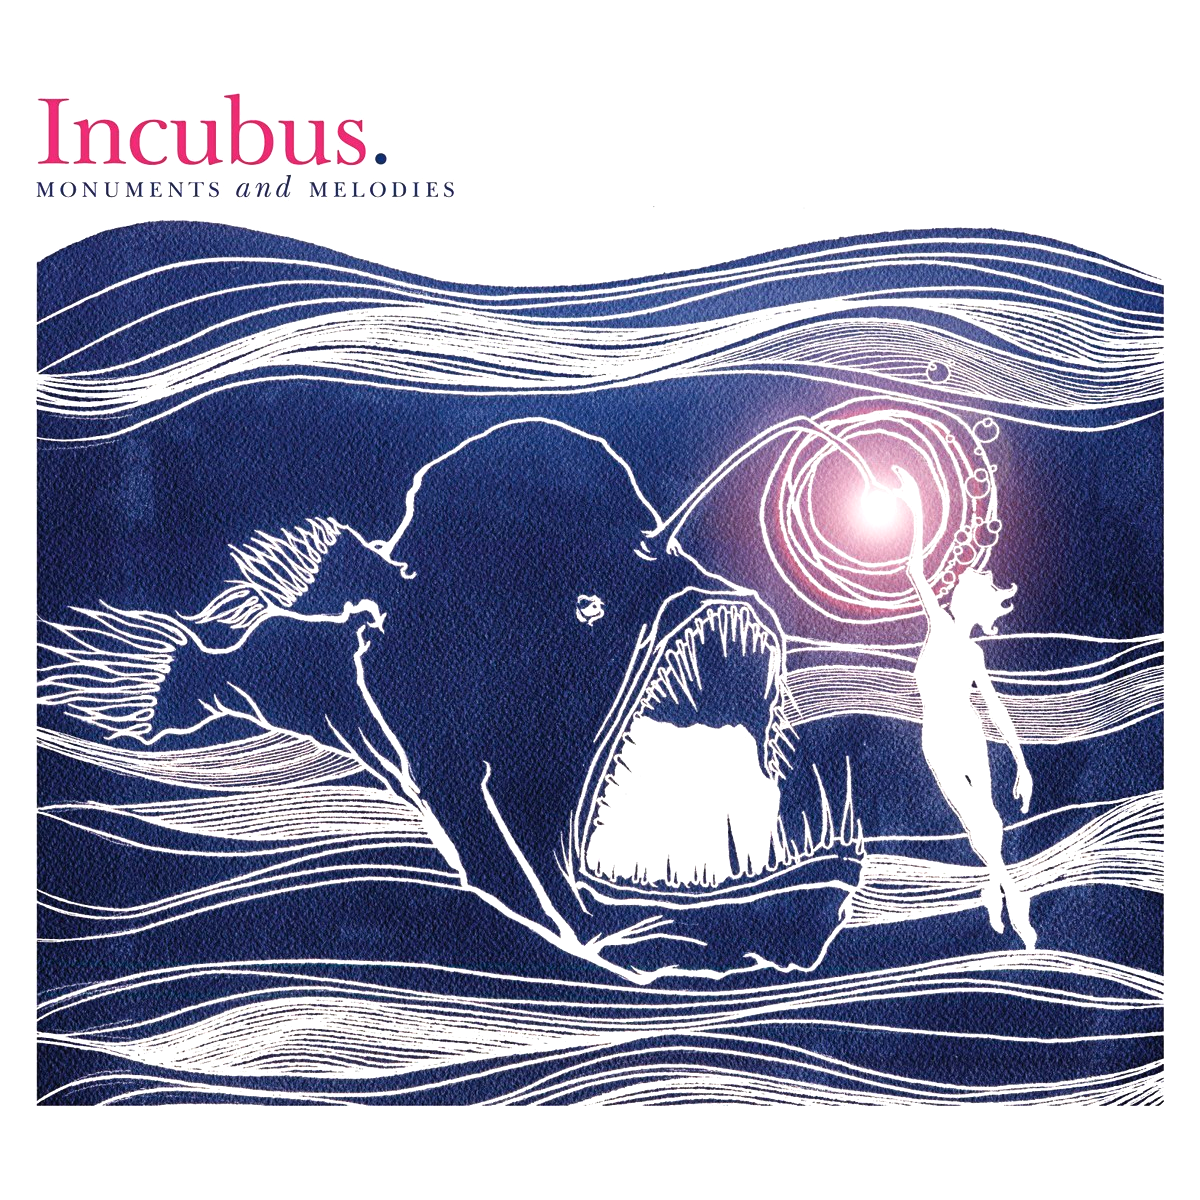 Incubus - Monuments And Melodies (2009) FLAC Download